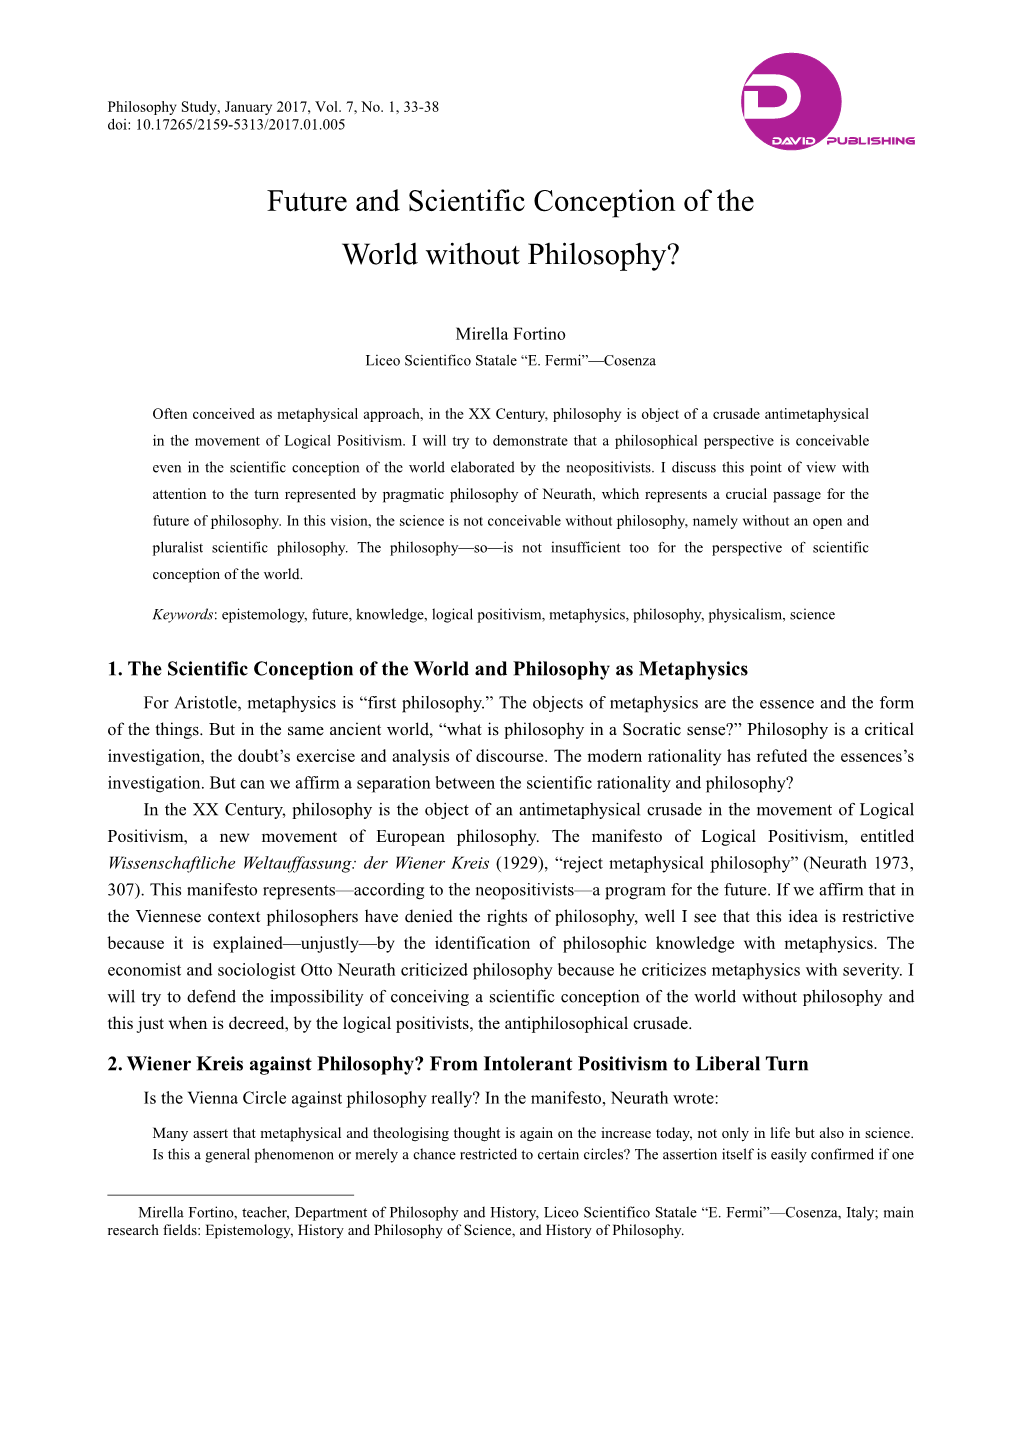 Future and Scientific Conception of the World Without Philosophy?